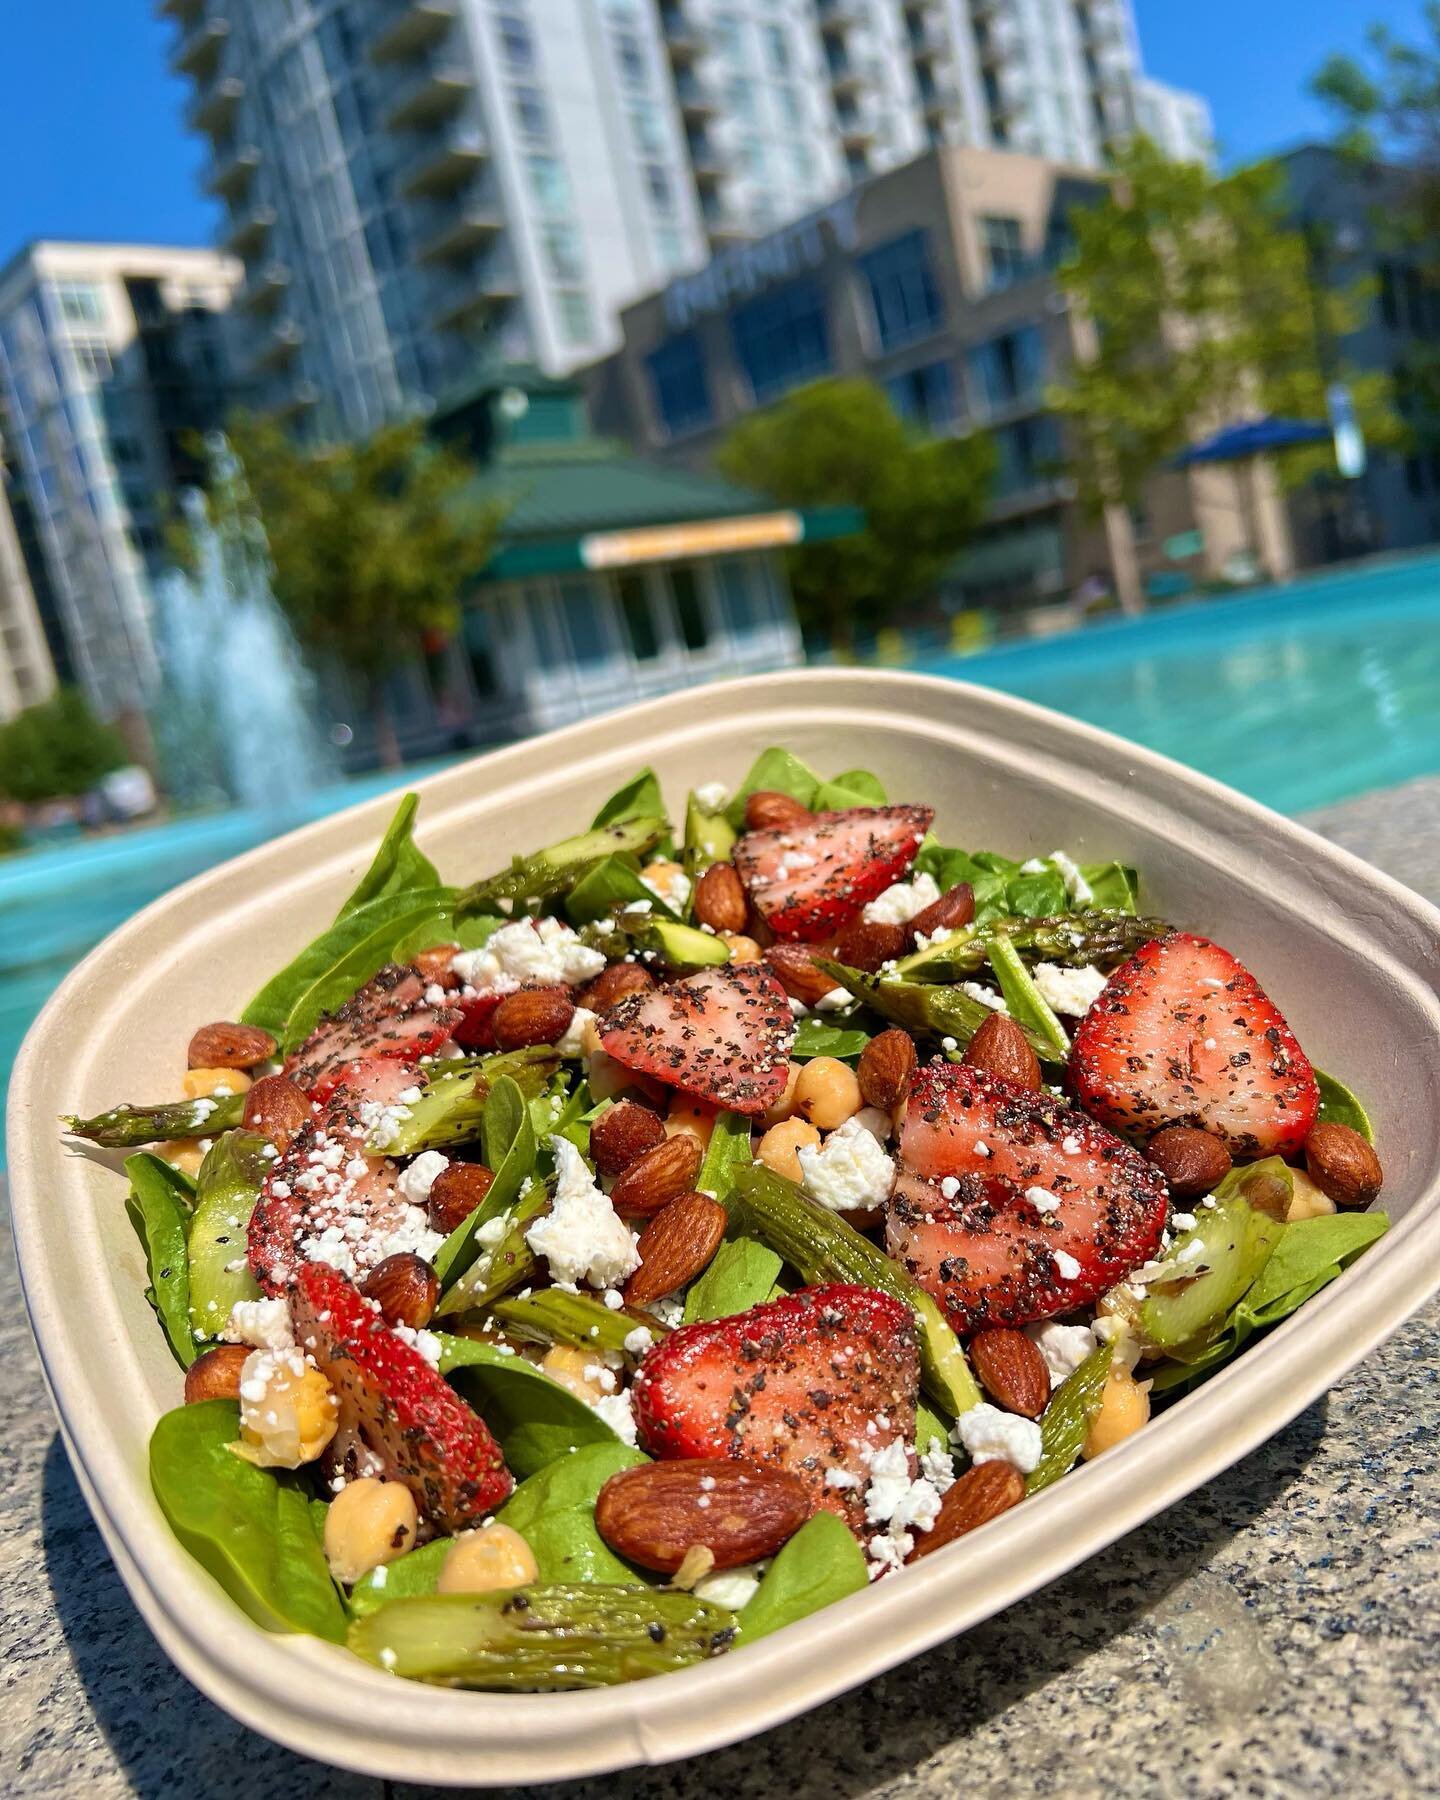 The Peppered Strawberry Salad Is Calling Your Name! 🗣️🍓🥗🍓

Order Yours On The @flavor.rush App or Our Website‼️

📸: Peppered Strawberry Salad 🍓 Fresh Cracked Black Pepper Dusted Strawberries ,Goat Cheese, Grilled Asparagus, Chic Peas, Smoked Al